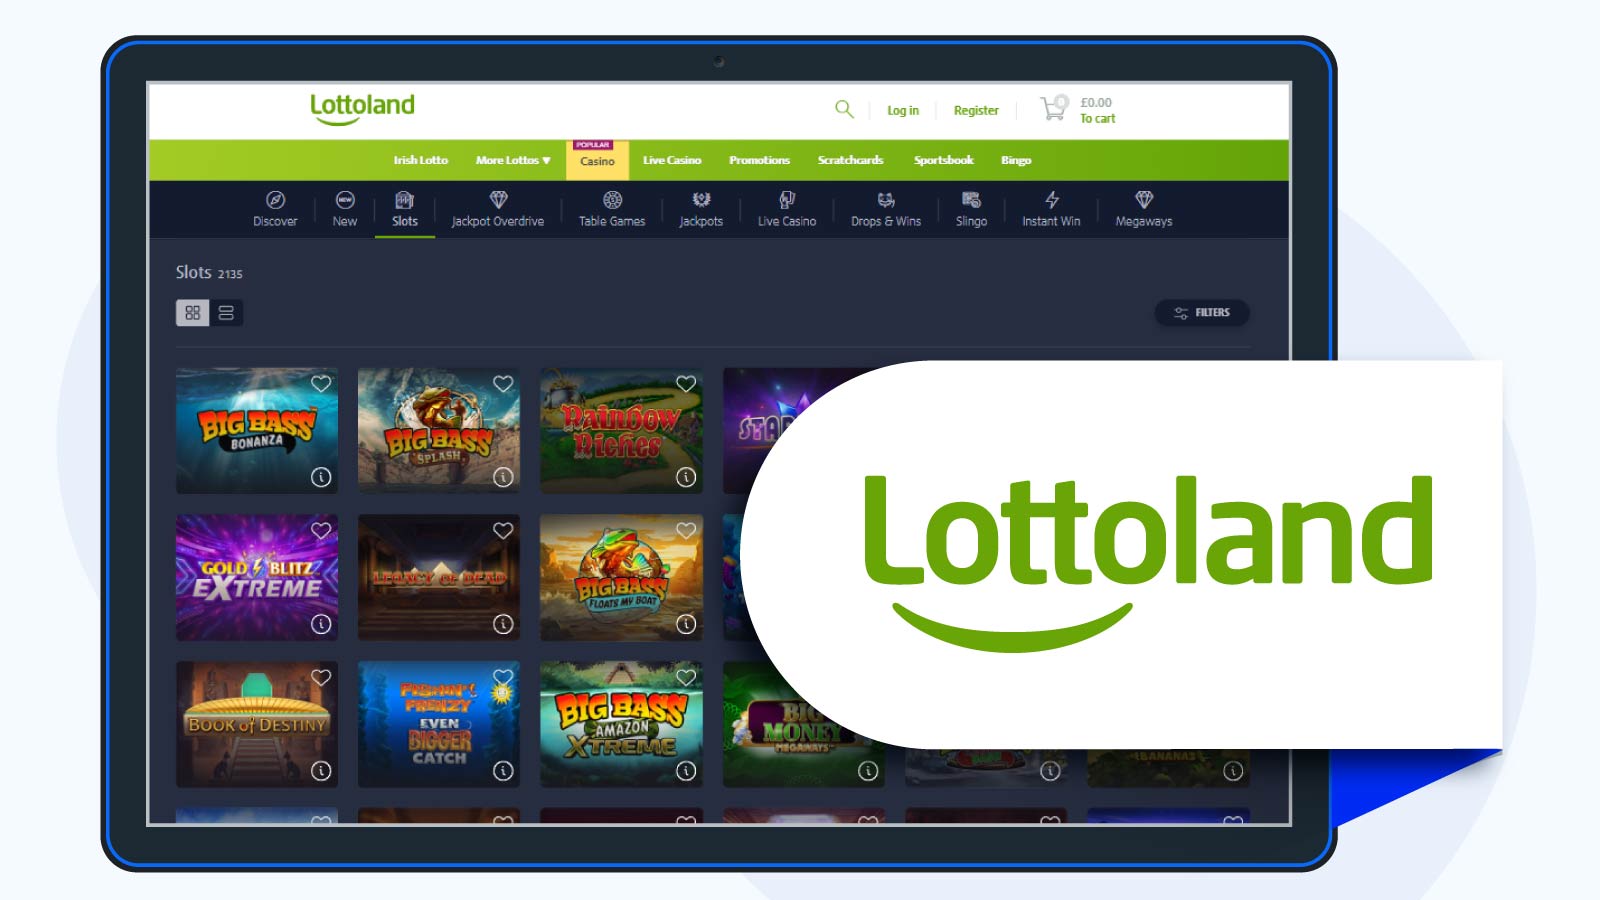 Lottoland 100 Spins on Big Bass Bonanza - Best for Advanced Gamblers